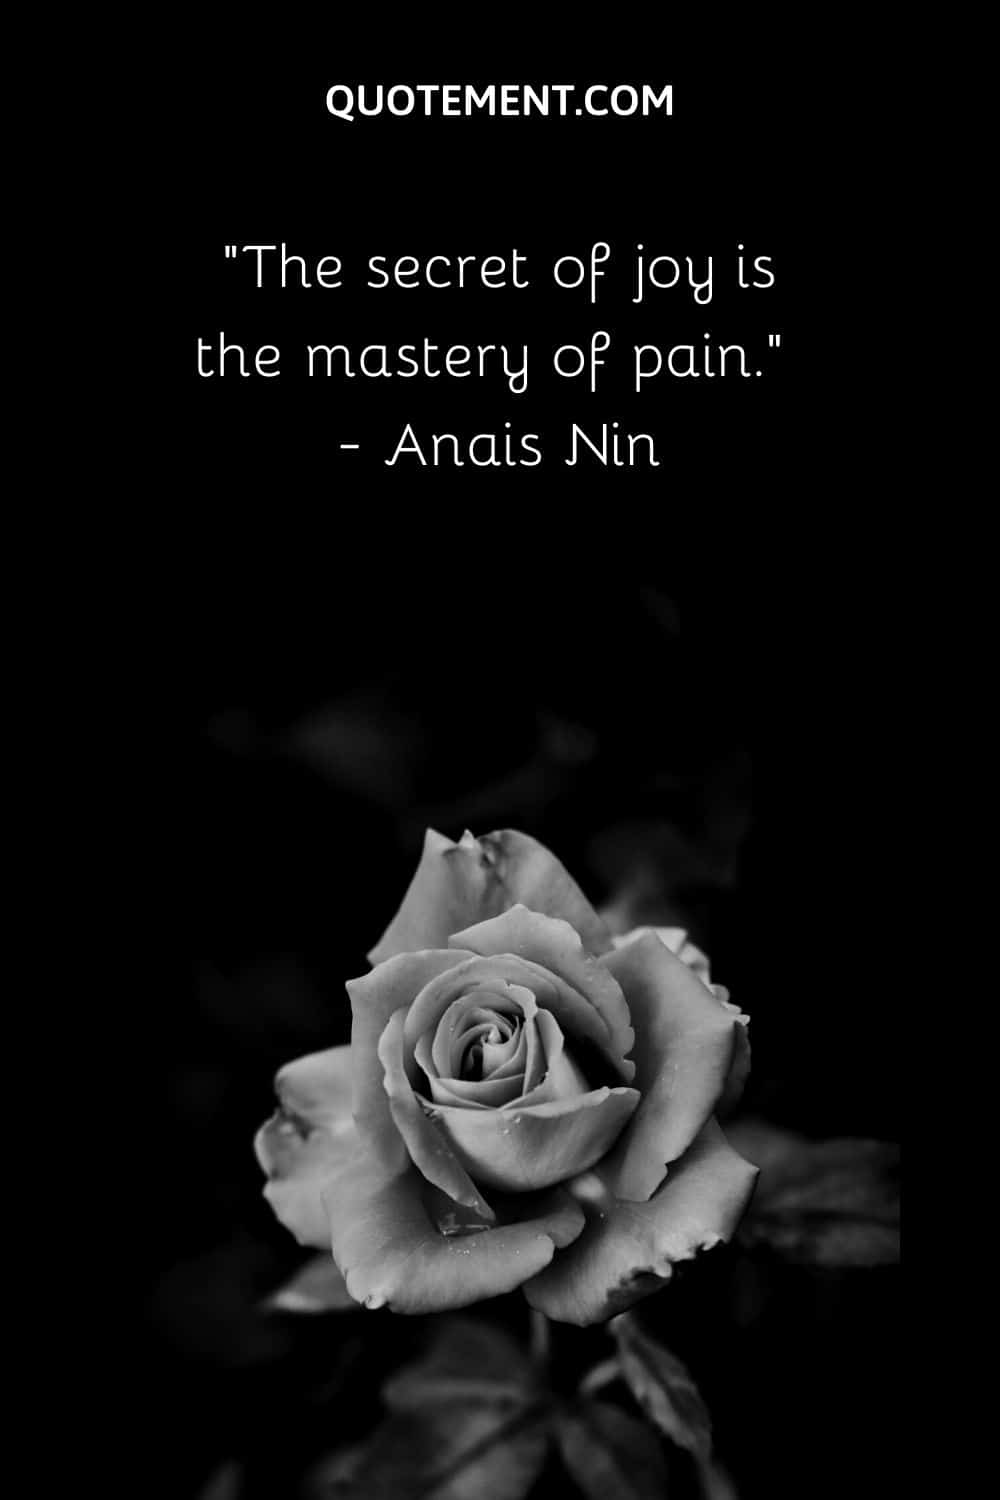 The secret of joy is the mastery of pain.